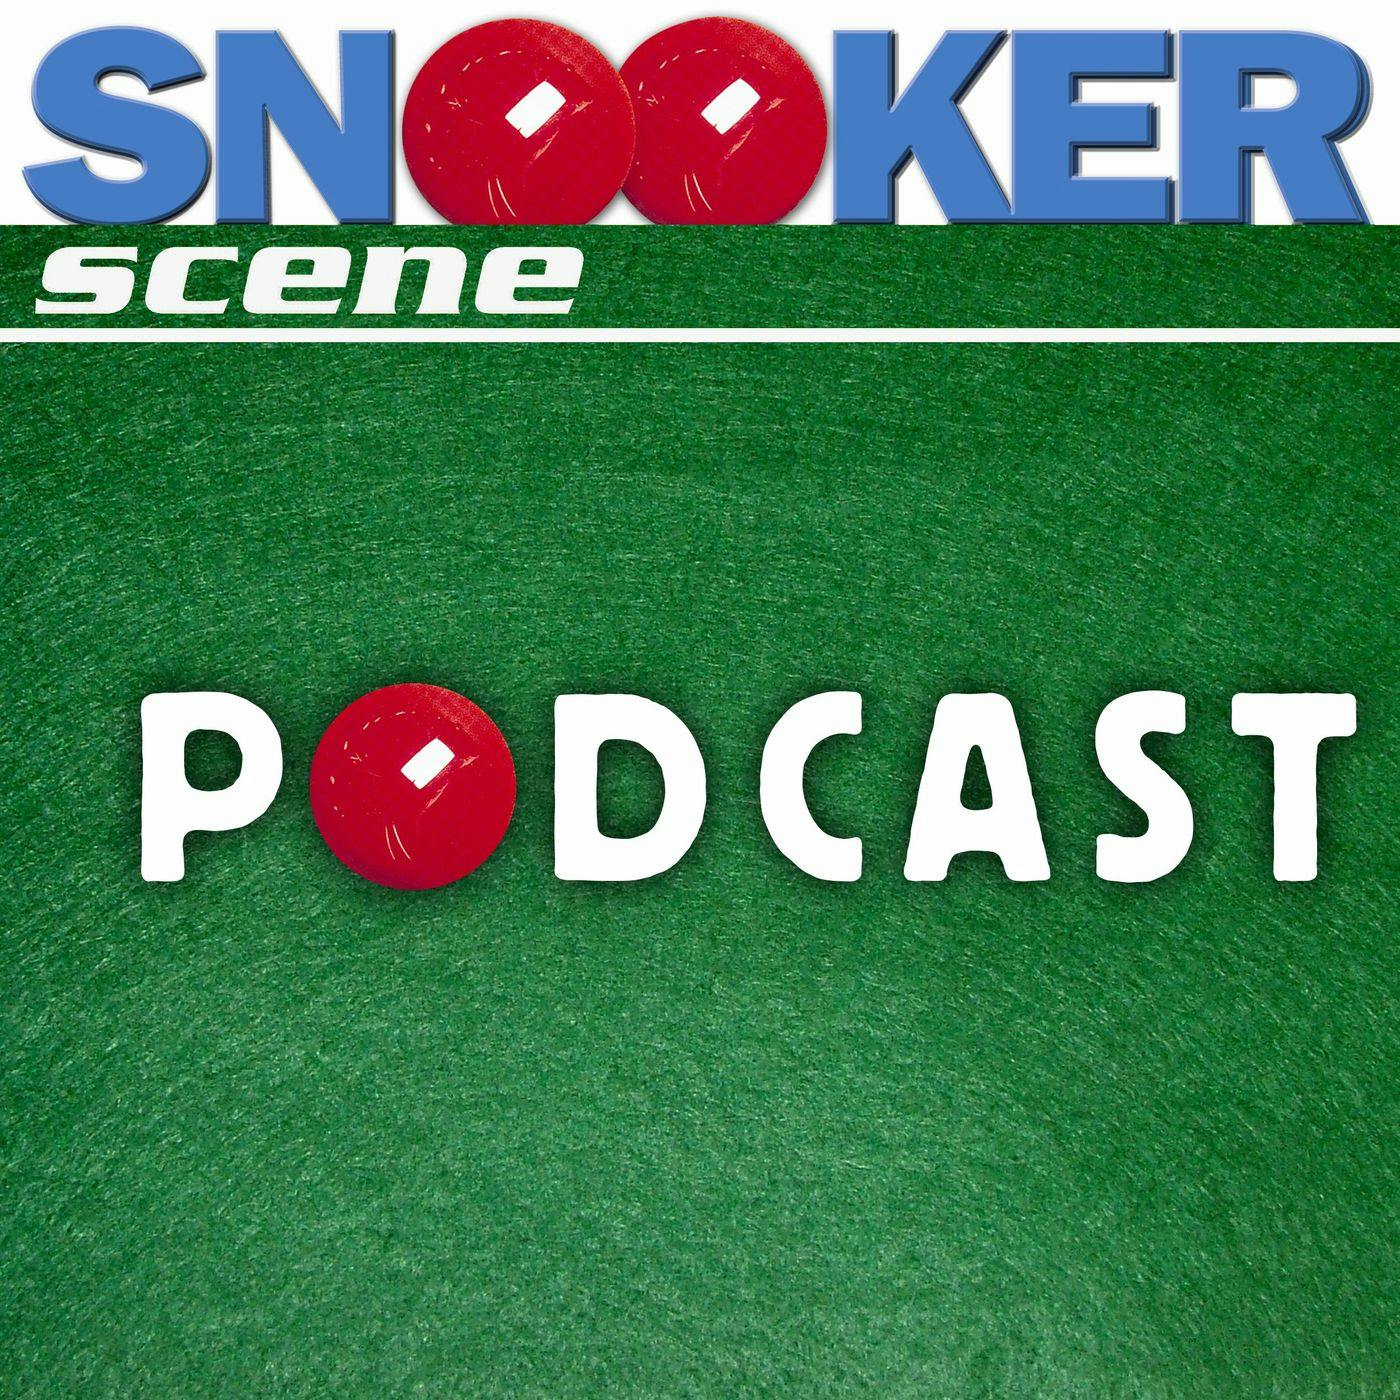 Snooker Scene Podcast episode 51 - The Crucible's Greatest Matches